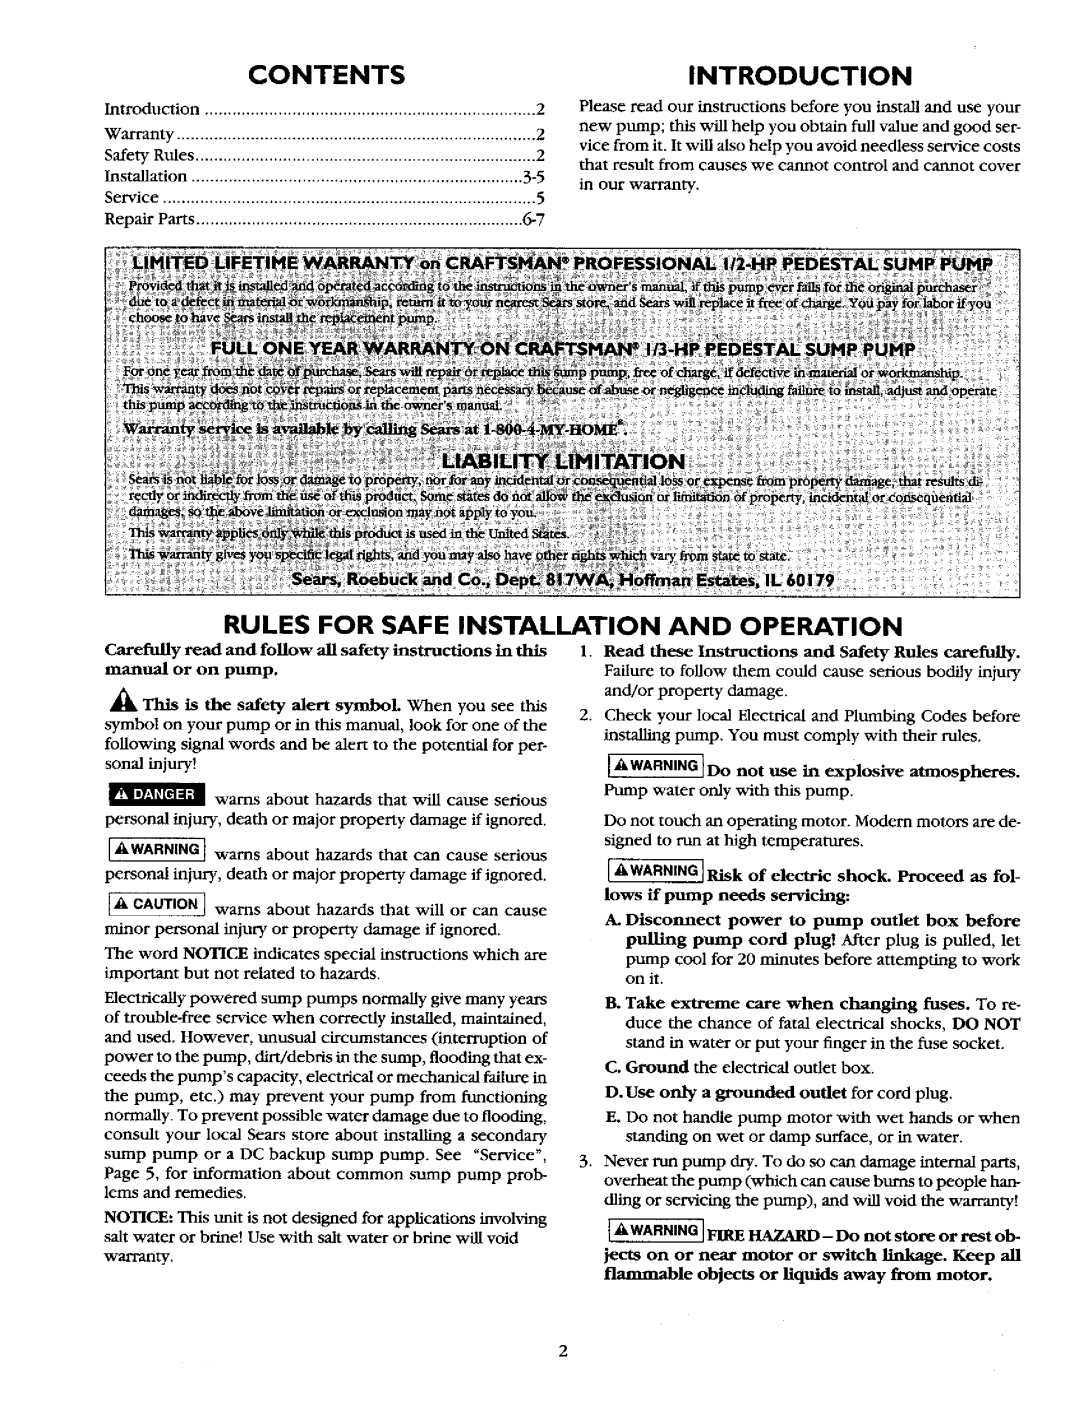 Sears 390.303491, 390.303302 owner manual Contents, Introduction, Rules For Safe Installation And Operation 